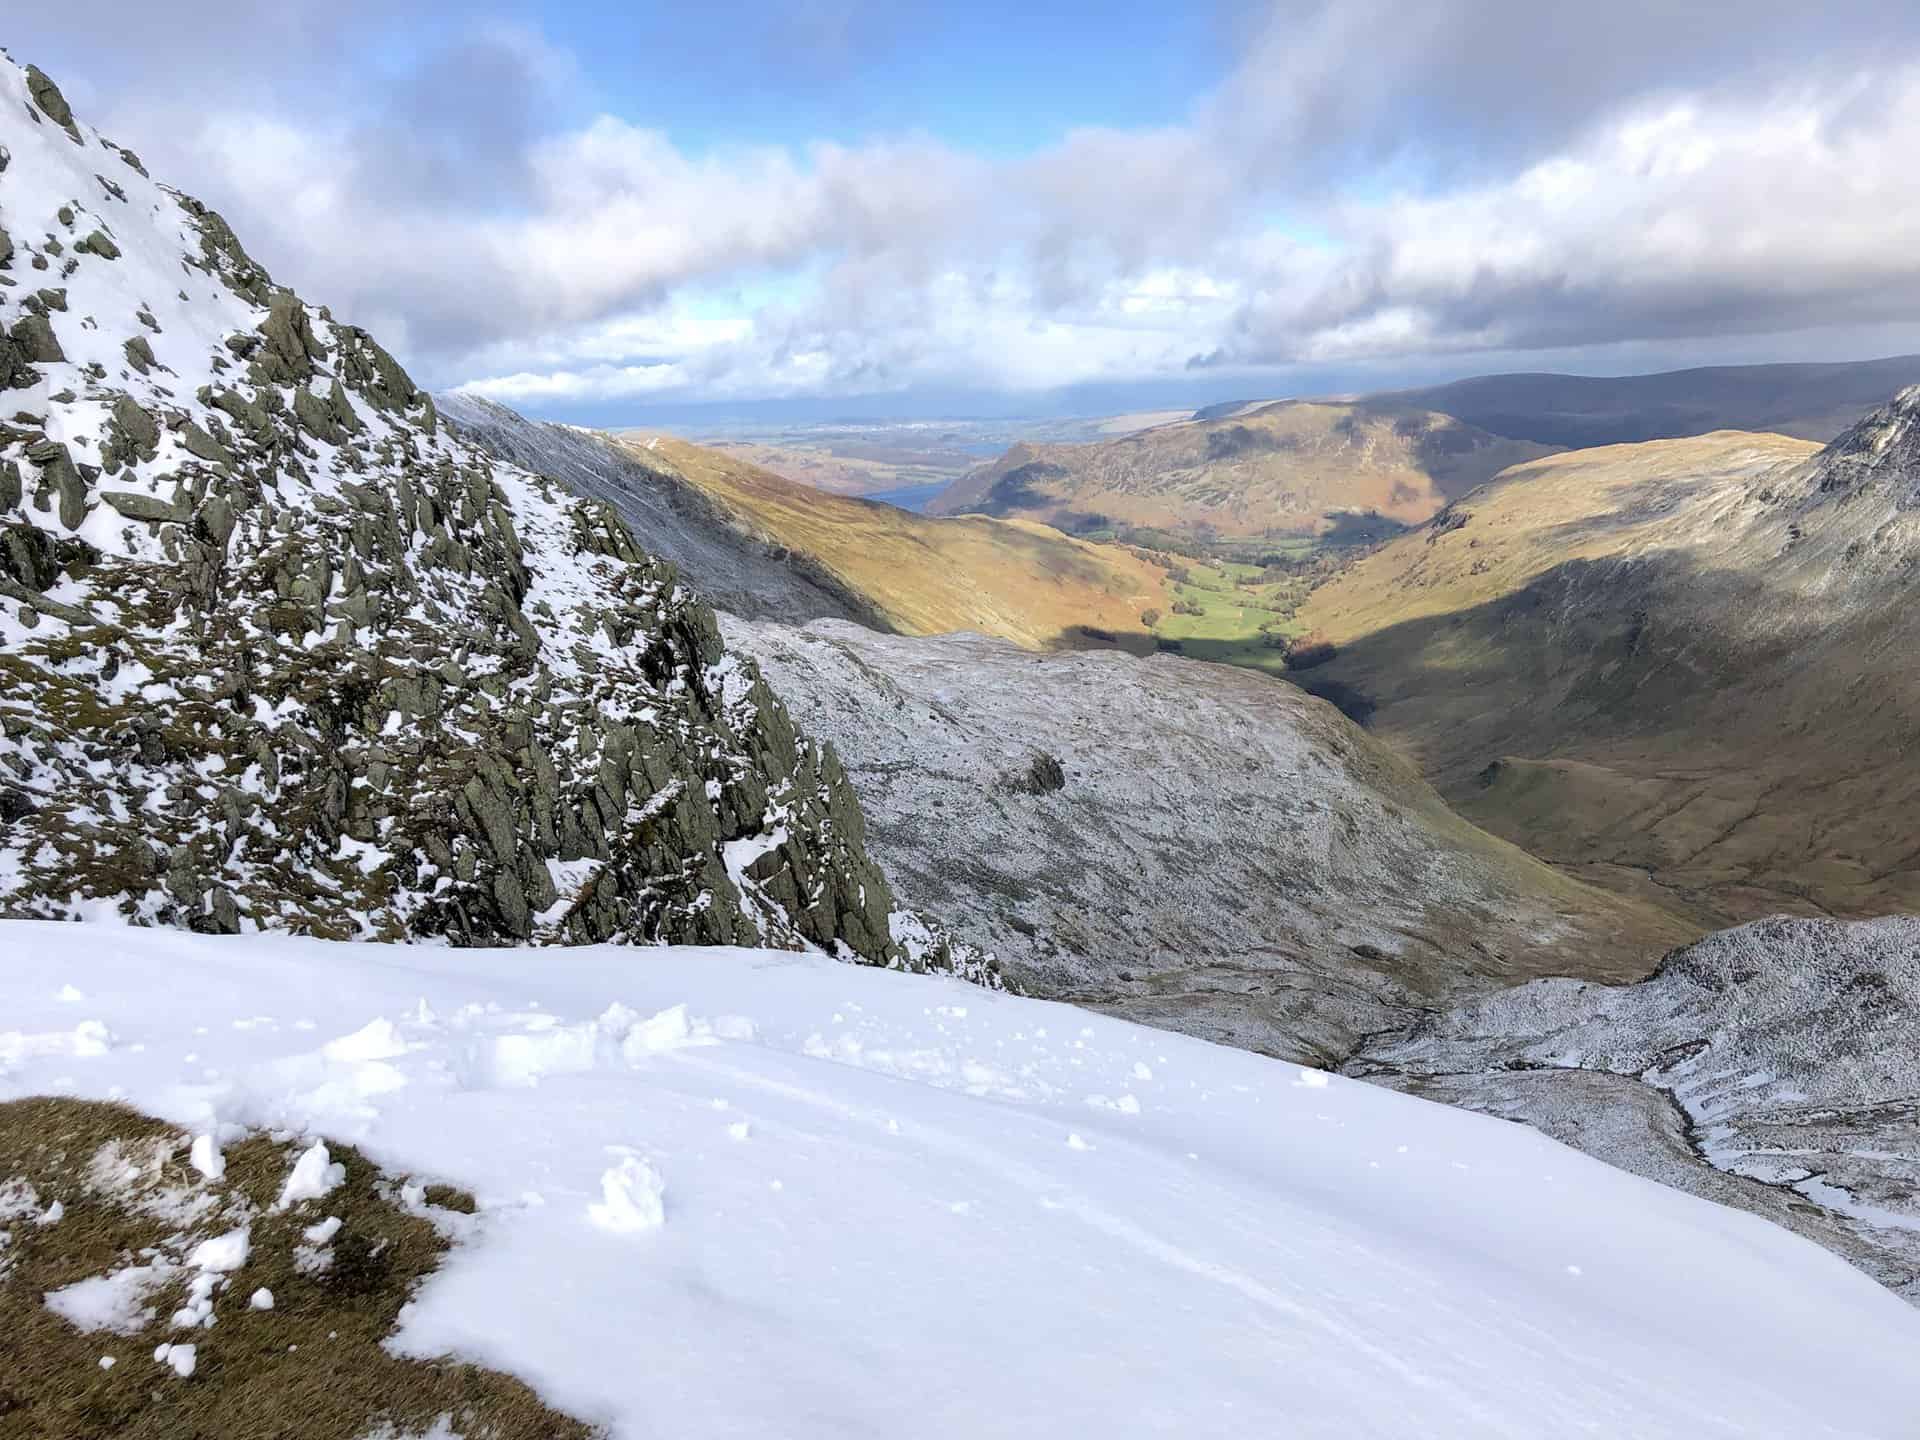 The panorama from Dollywaggon Pike, a spectacular point overlooking Grisedale towards Patterdale and Ullswater.